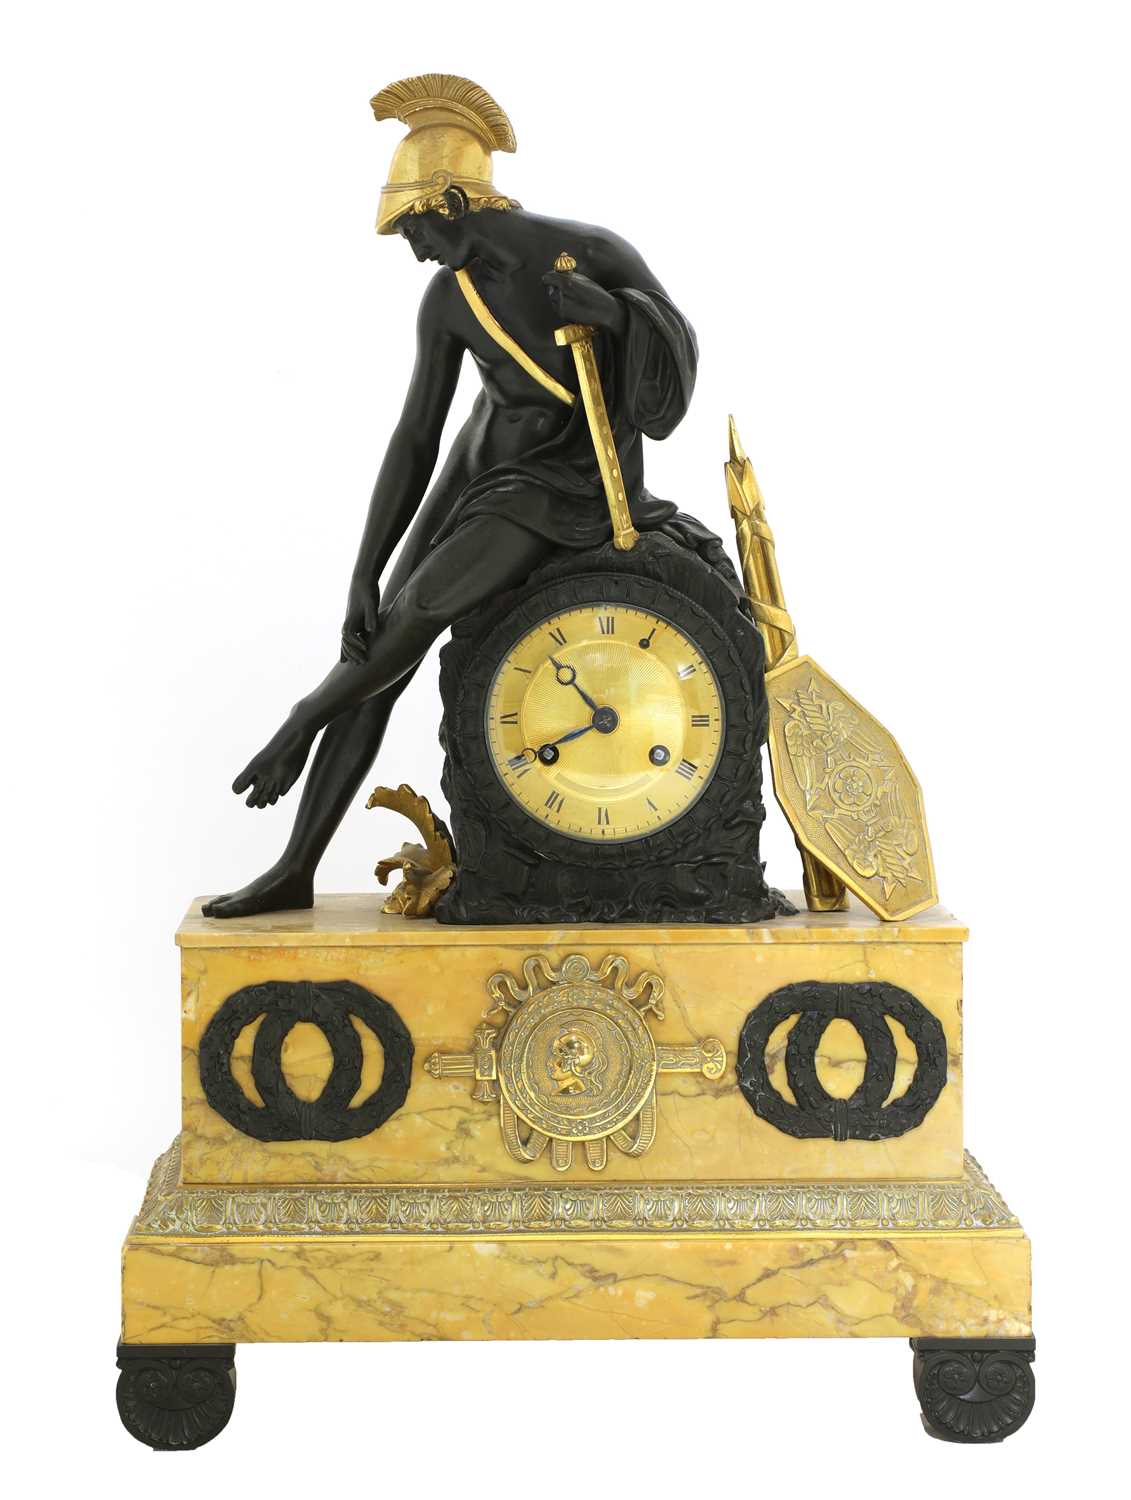 Lot 52 - A French Empire patinated and gilt-bronze and Sienna marble mantel clock